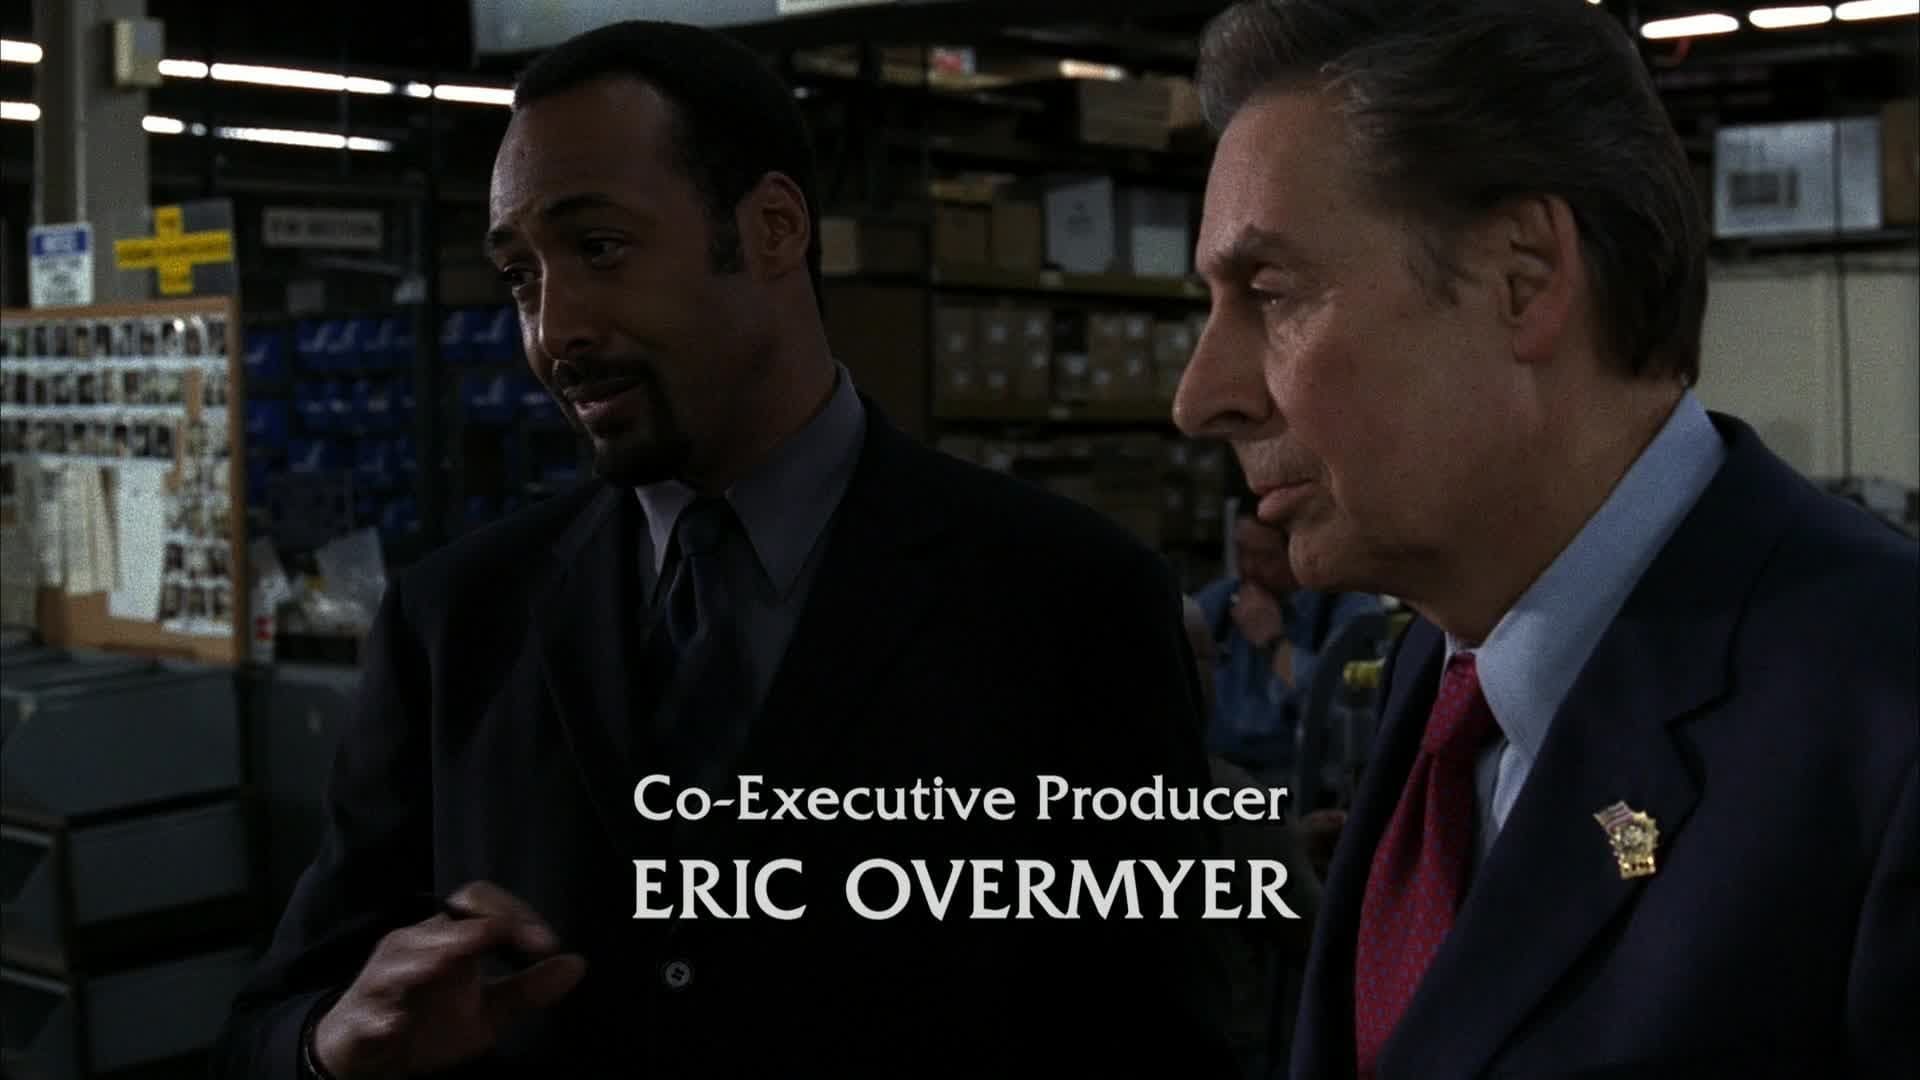 Law & Order background